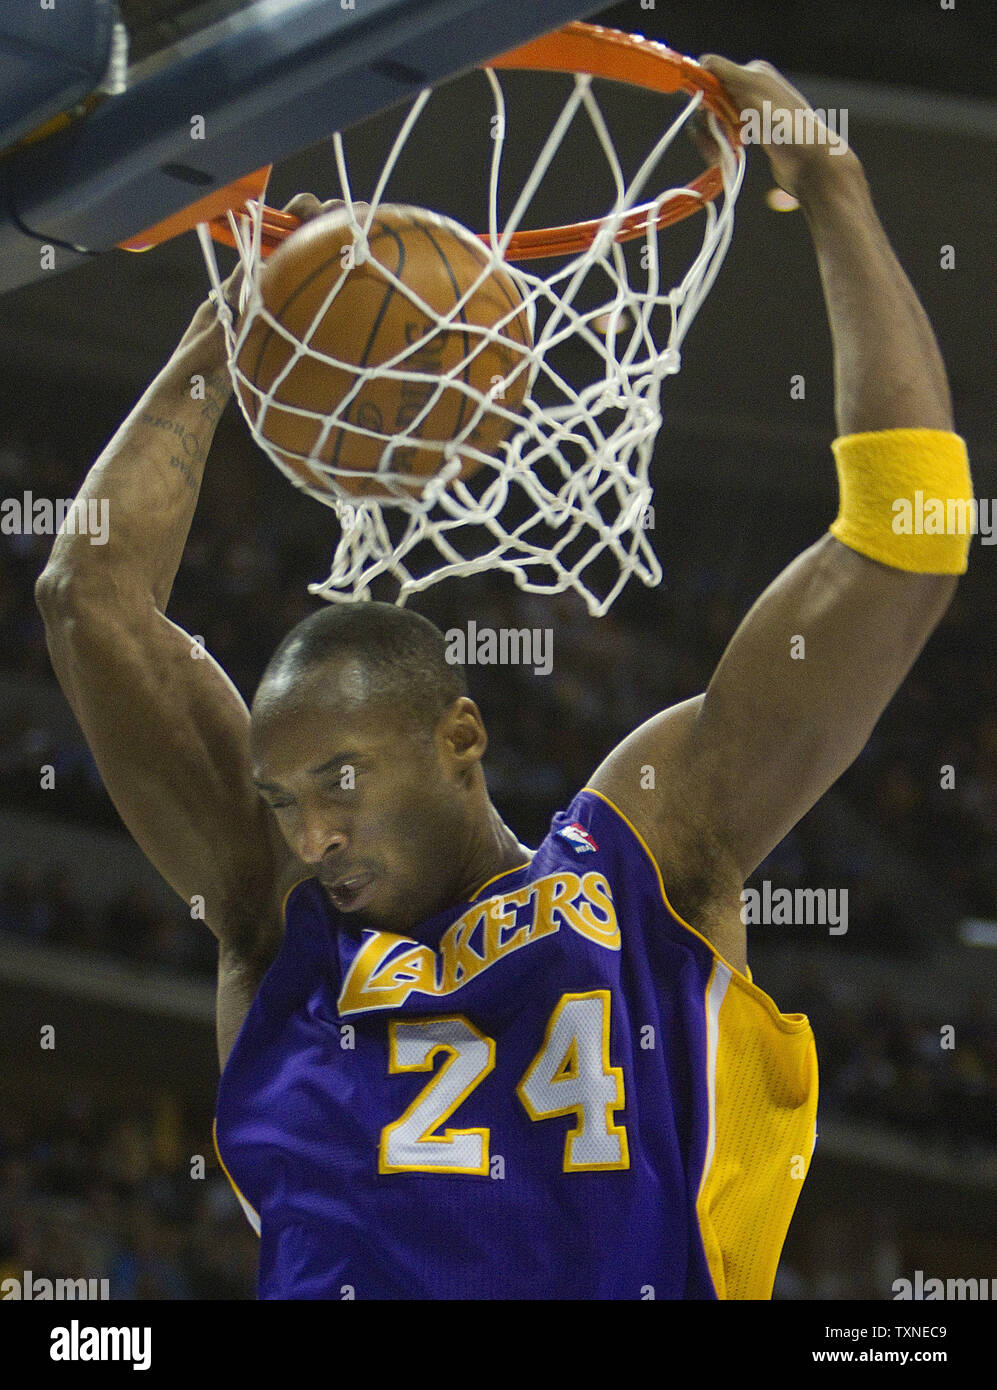 Los Angeles Lakers guard Kobe Bryant dunks against the Denver Nuggets at the Pepsi Center in Denver on January 21, 2011.   The Lakers beat the Nuggets 107-97.      UPI/Gary C. Caskey Stock Photo